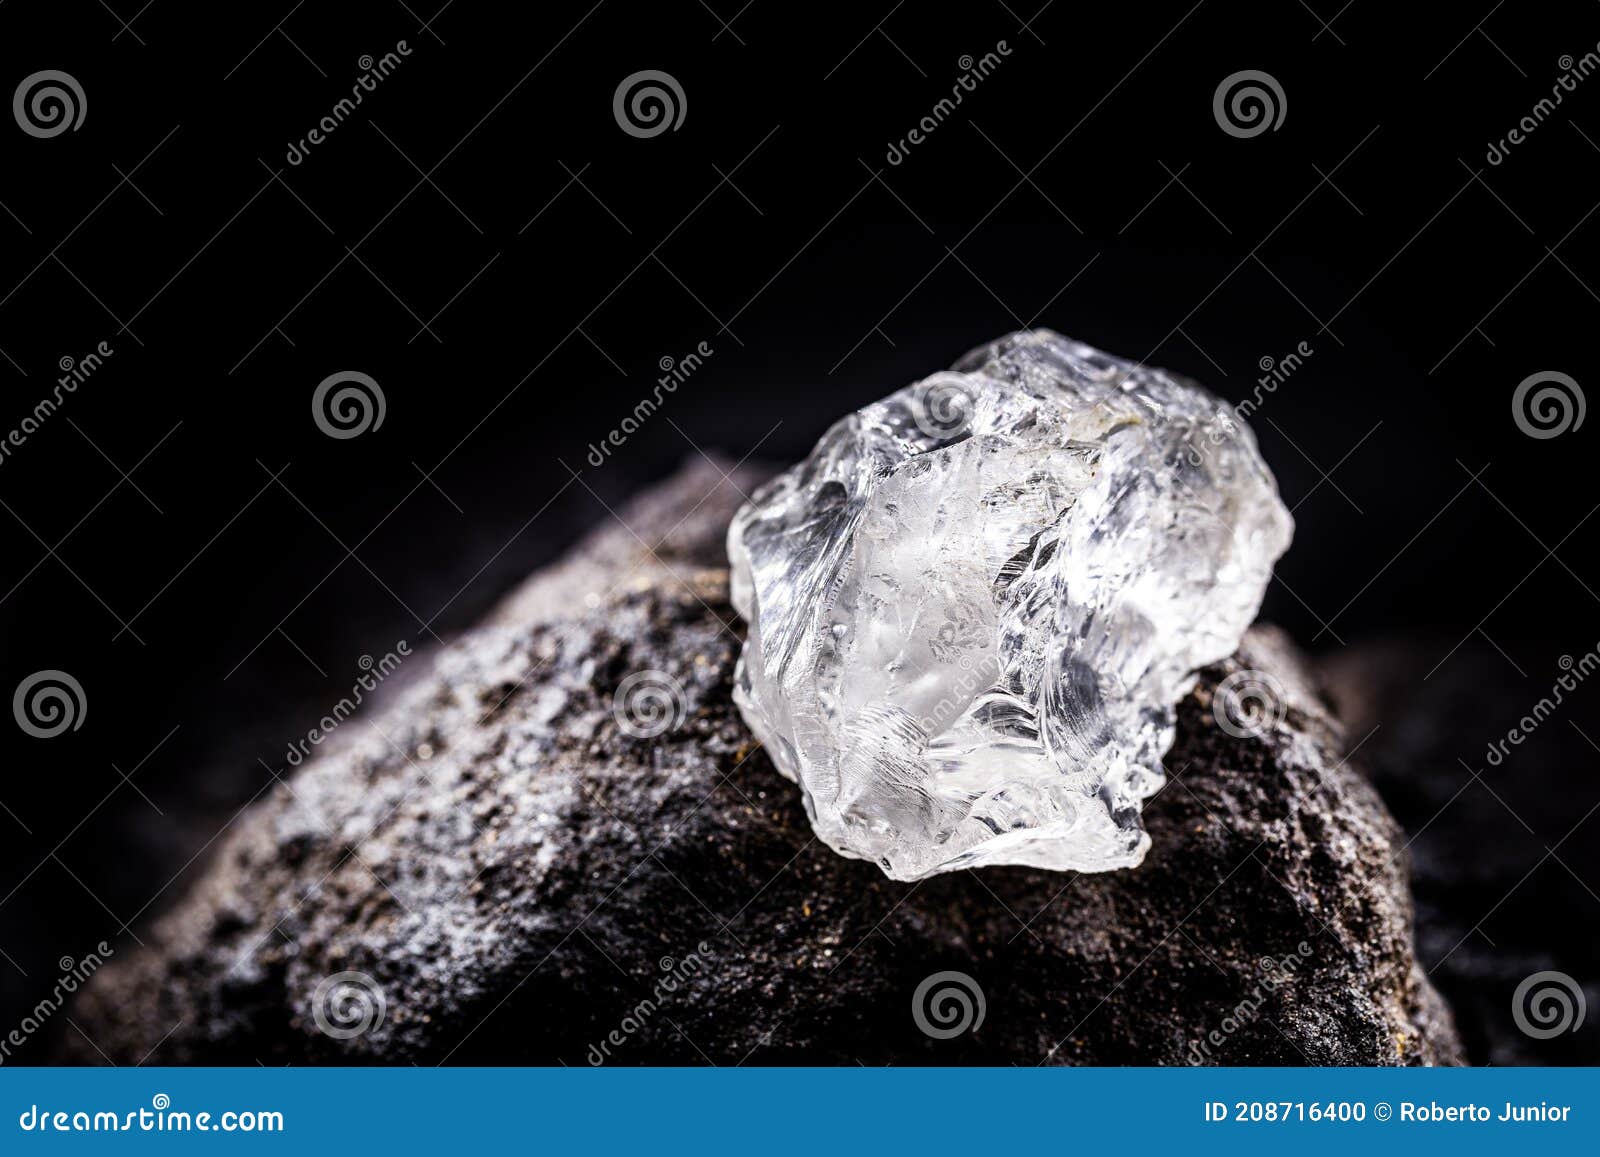 rough diamond  precious stone in mines. concept of mining and extraction of rare ores